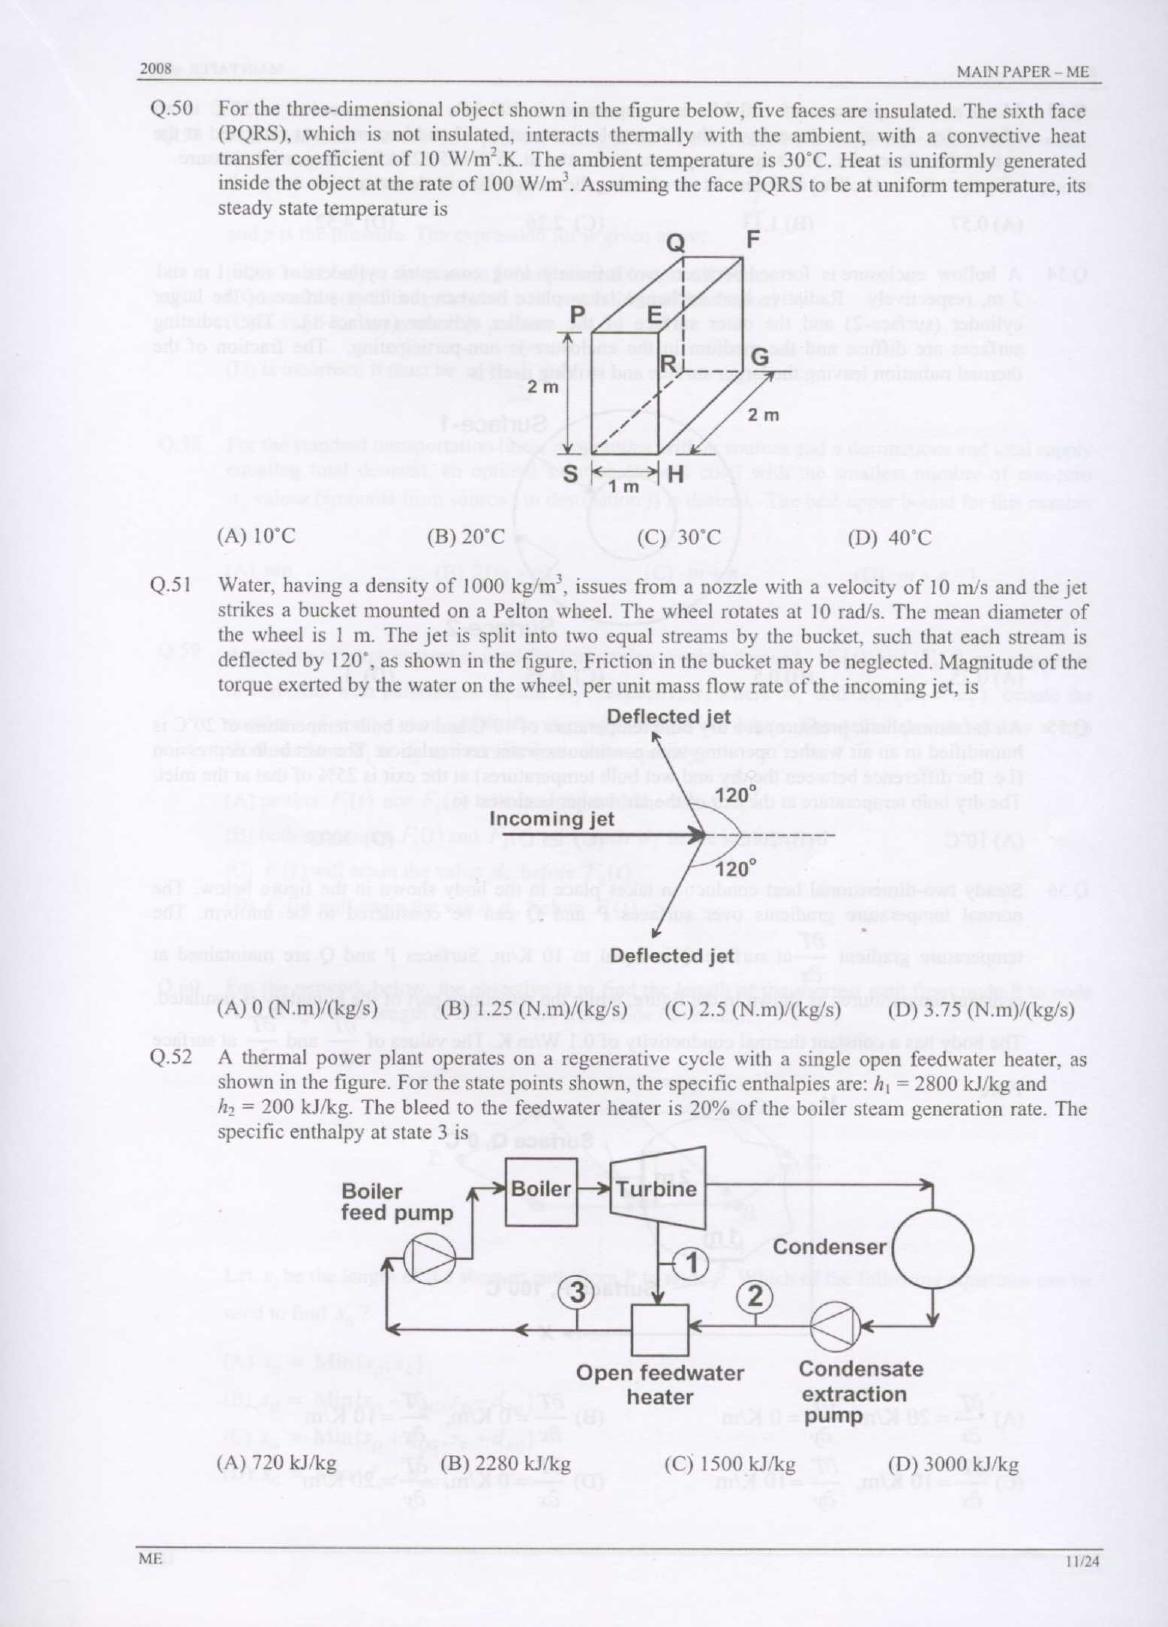 GATE 2008 Mechanical Engineering (ME) Question Paper with Answer Key - Page 11